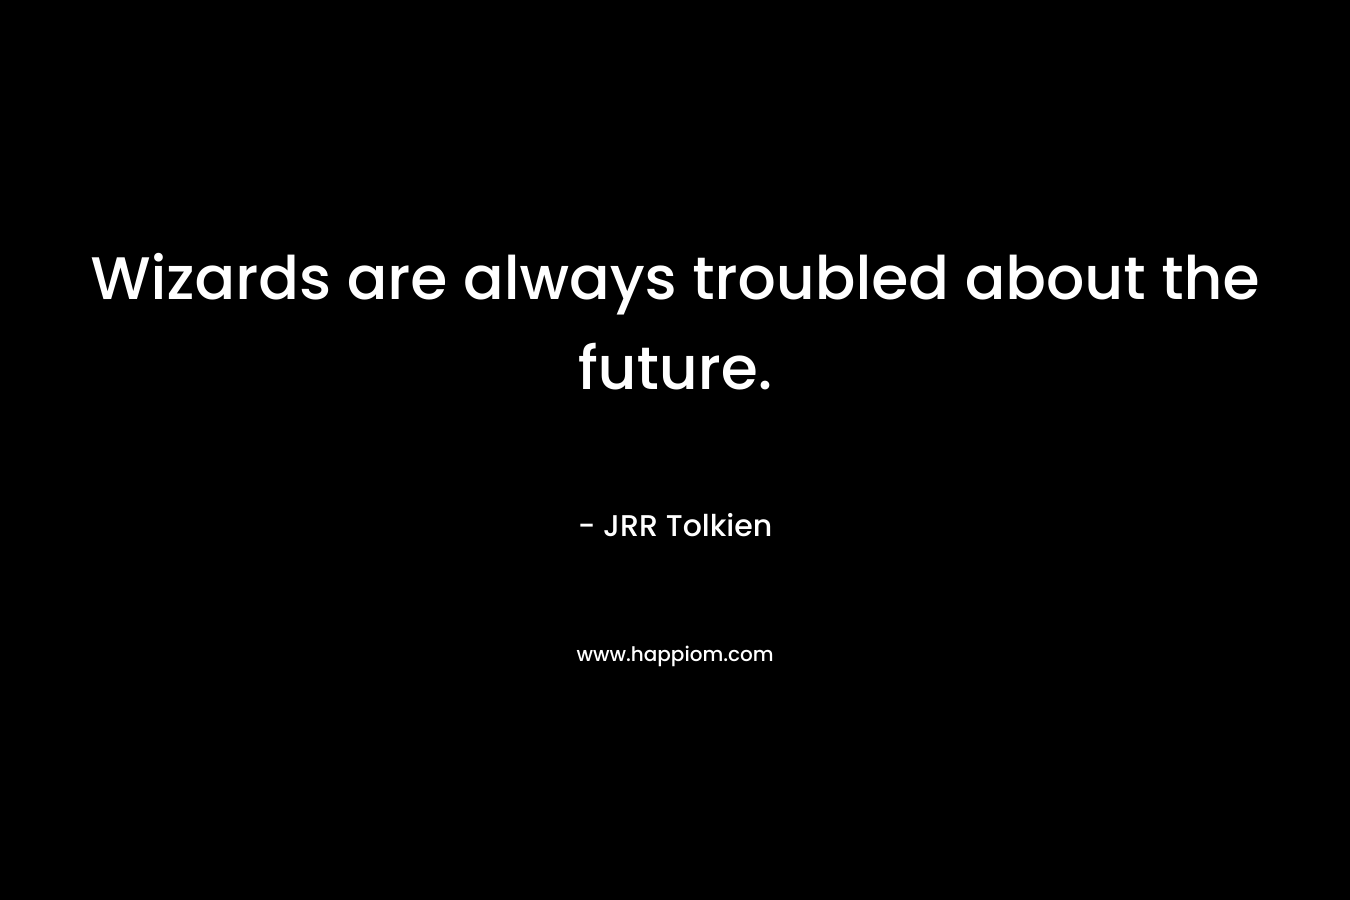 Wizards are always troubled about the future. – JRR Tolkien